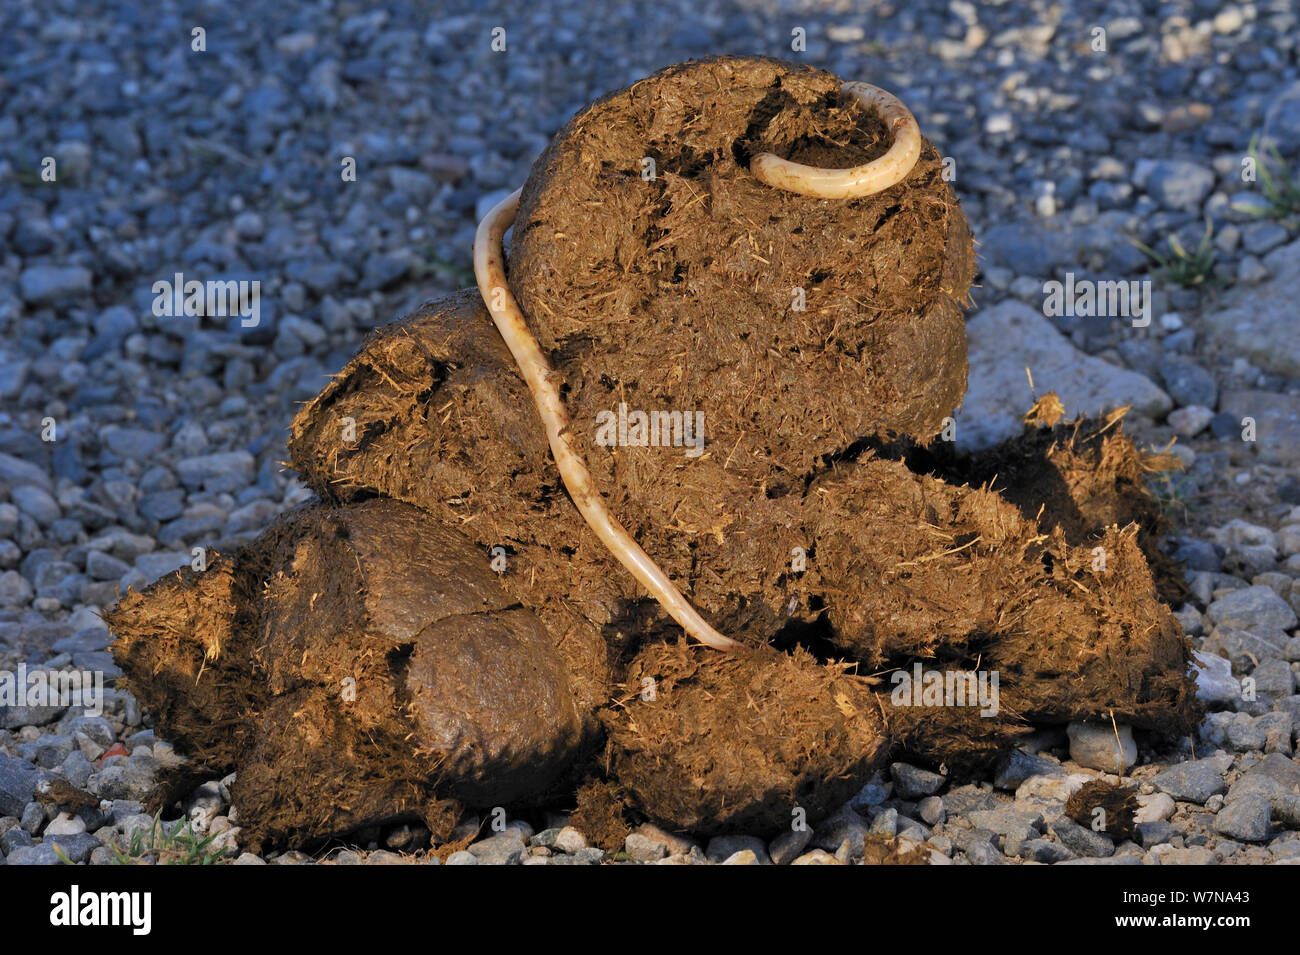 Horse / Equine roundworms (Parascaris equorum) in horse dung, France Stock Photo